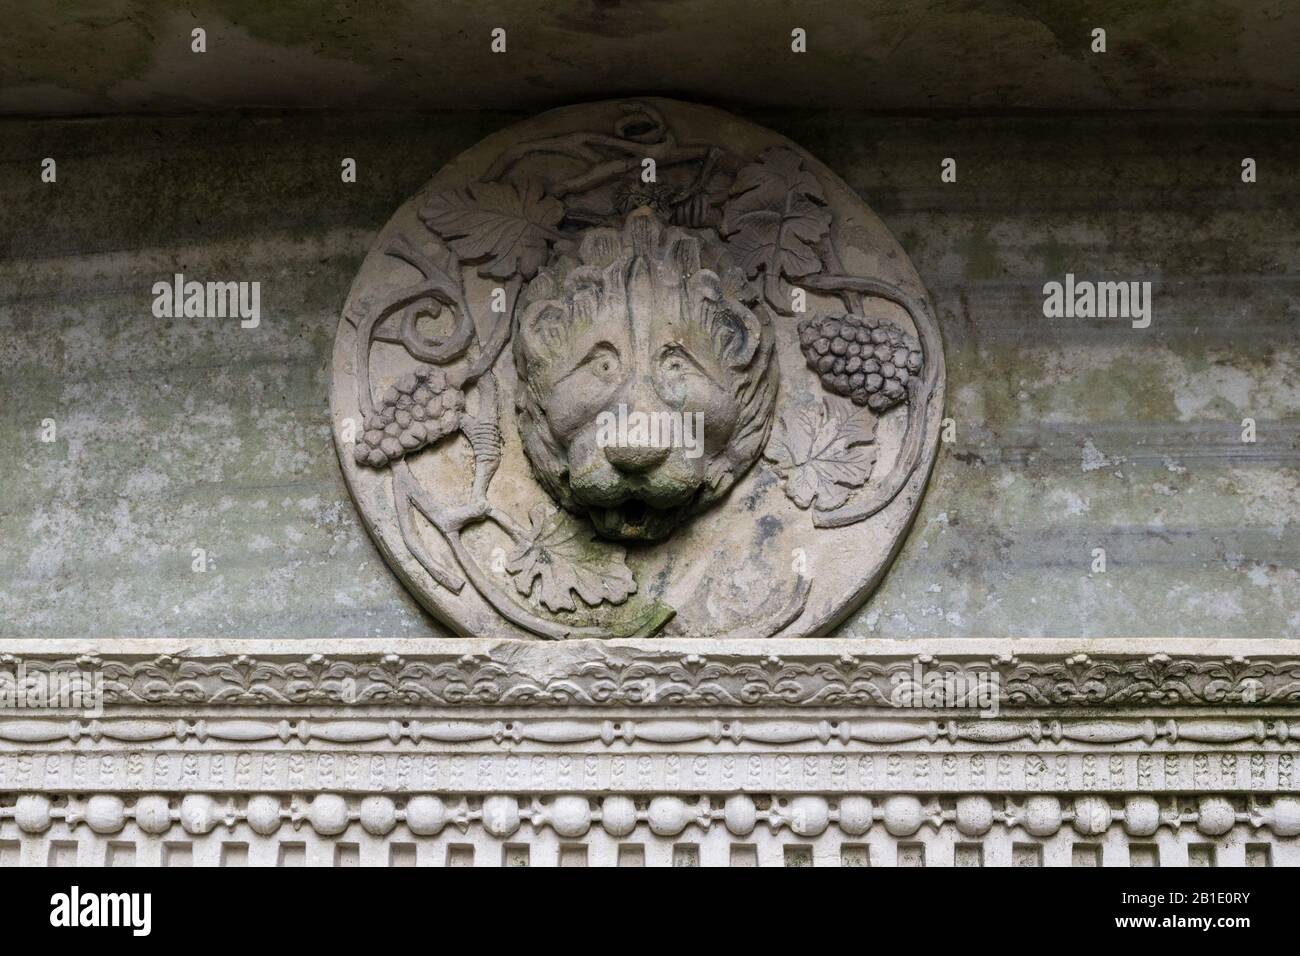 Carved stone lion's head plaque, part of an ornate fountain, Castle Ashby Gardens, Northamptonshire, UK Stock Photo